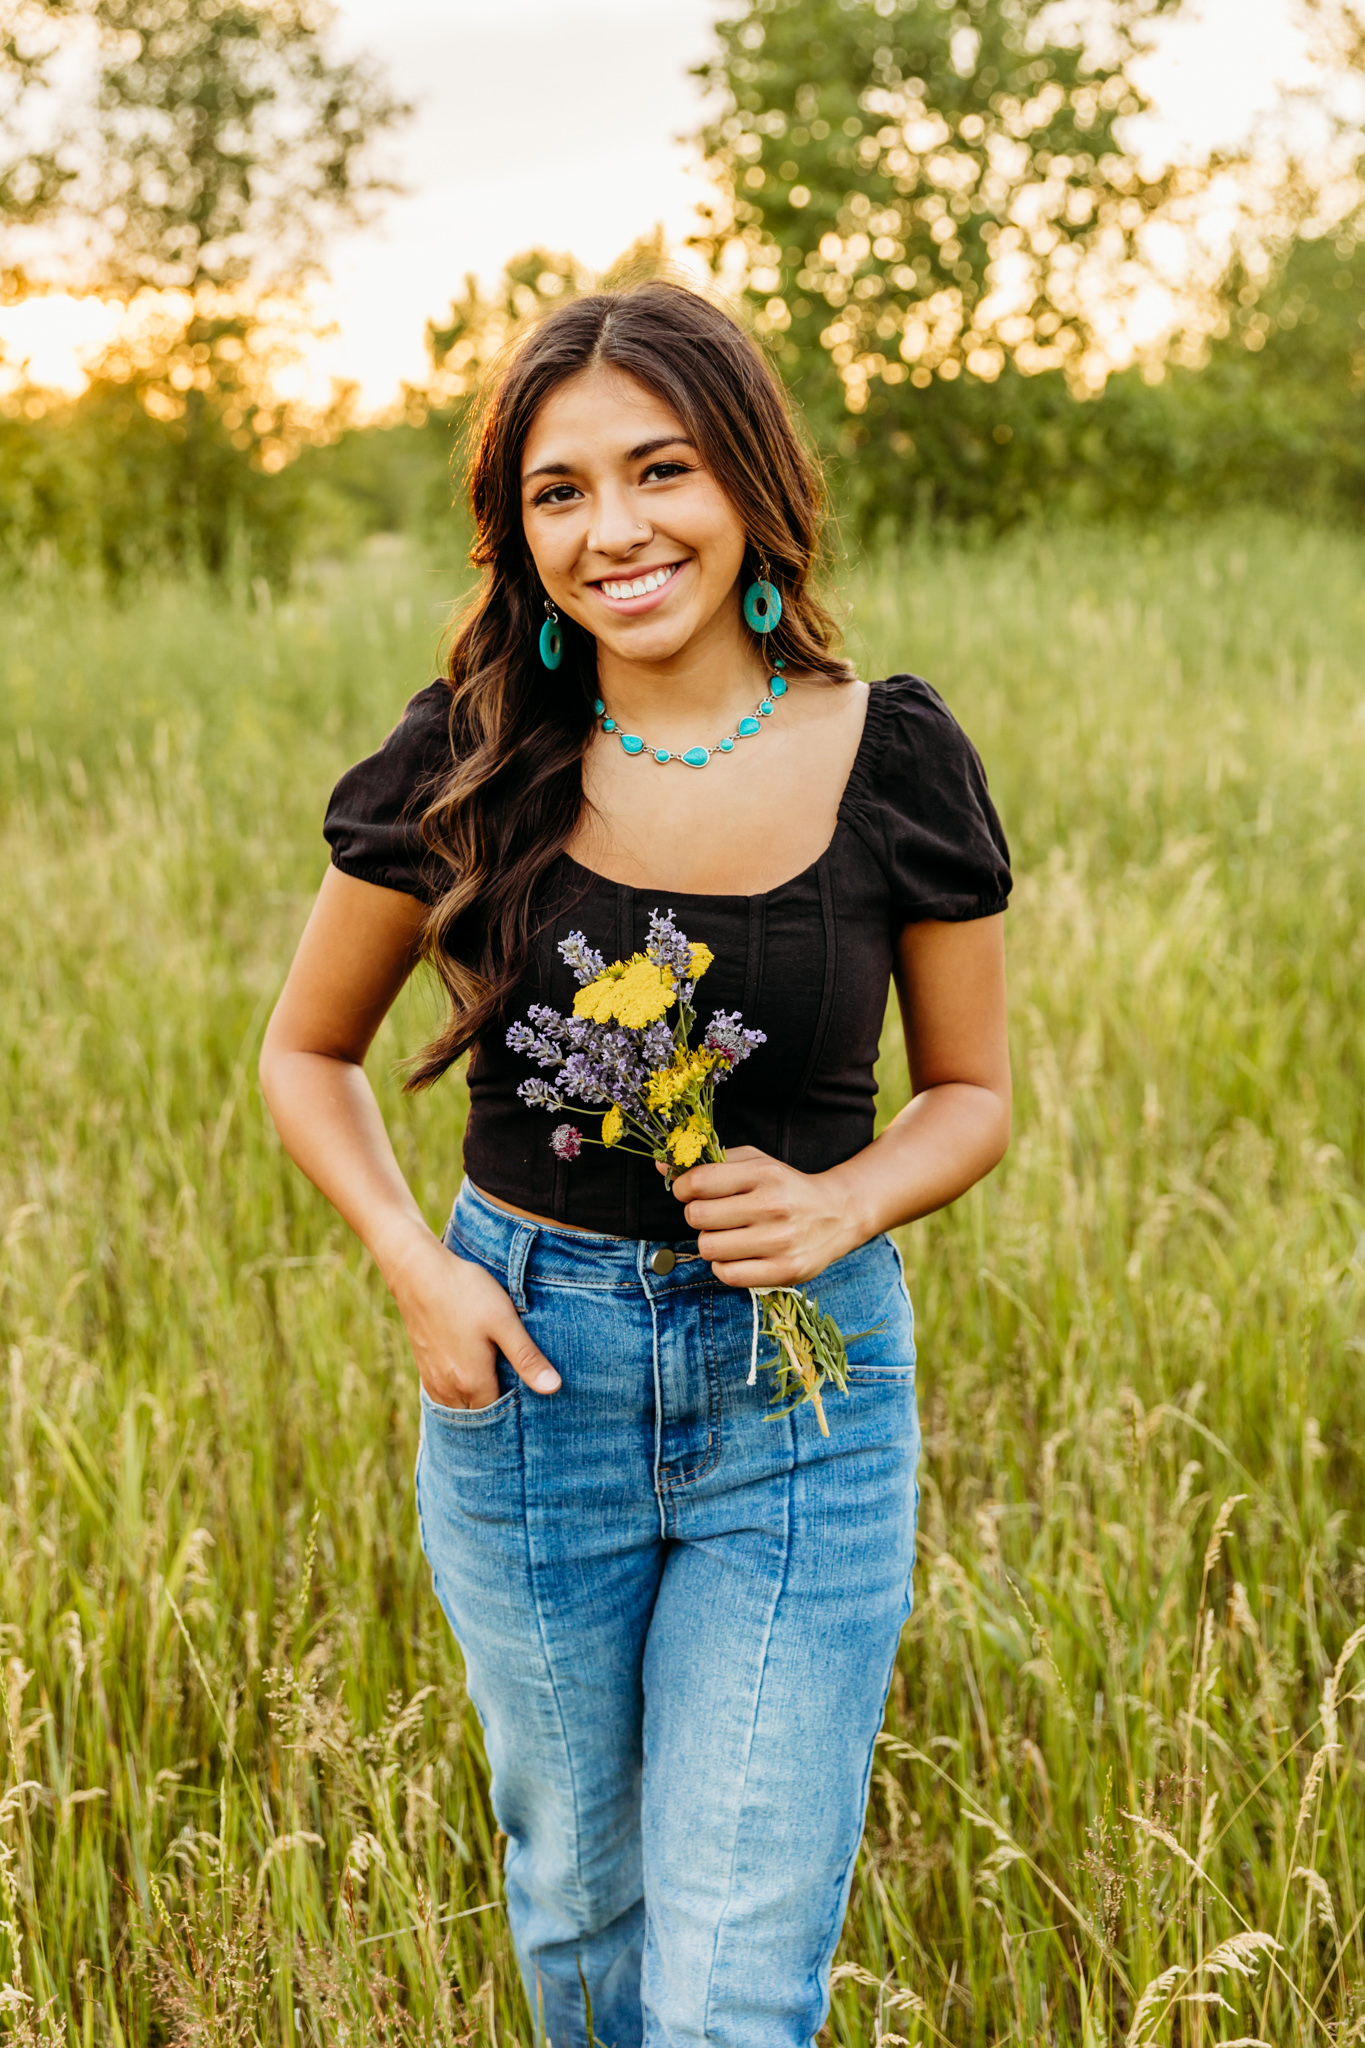 high school girl in a black top, denim pants and turquoise jewelry smiling with one hand in her pocket and the other holding a bouquet of wildflowers for a blog post about Red's Boutique in Winneconne